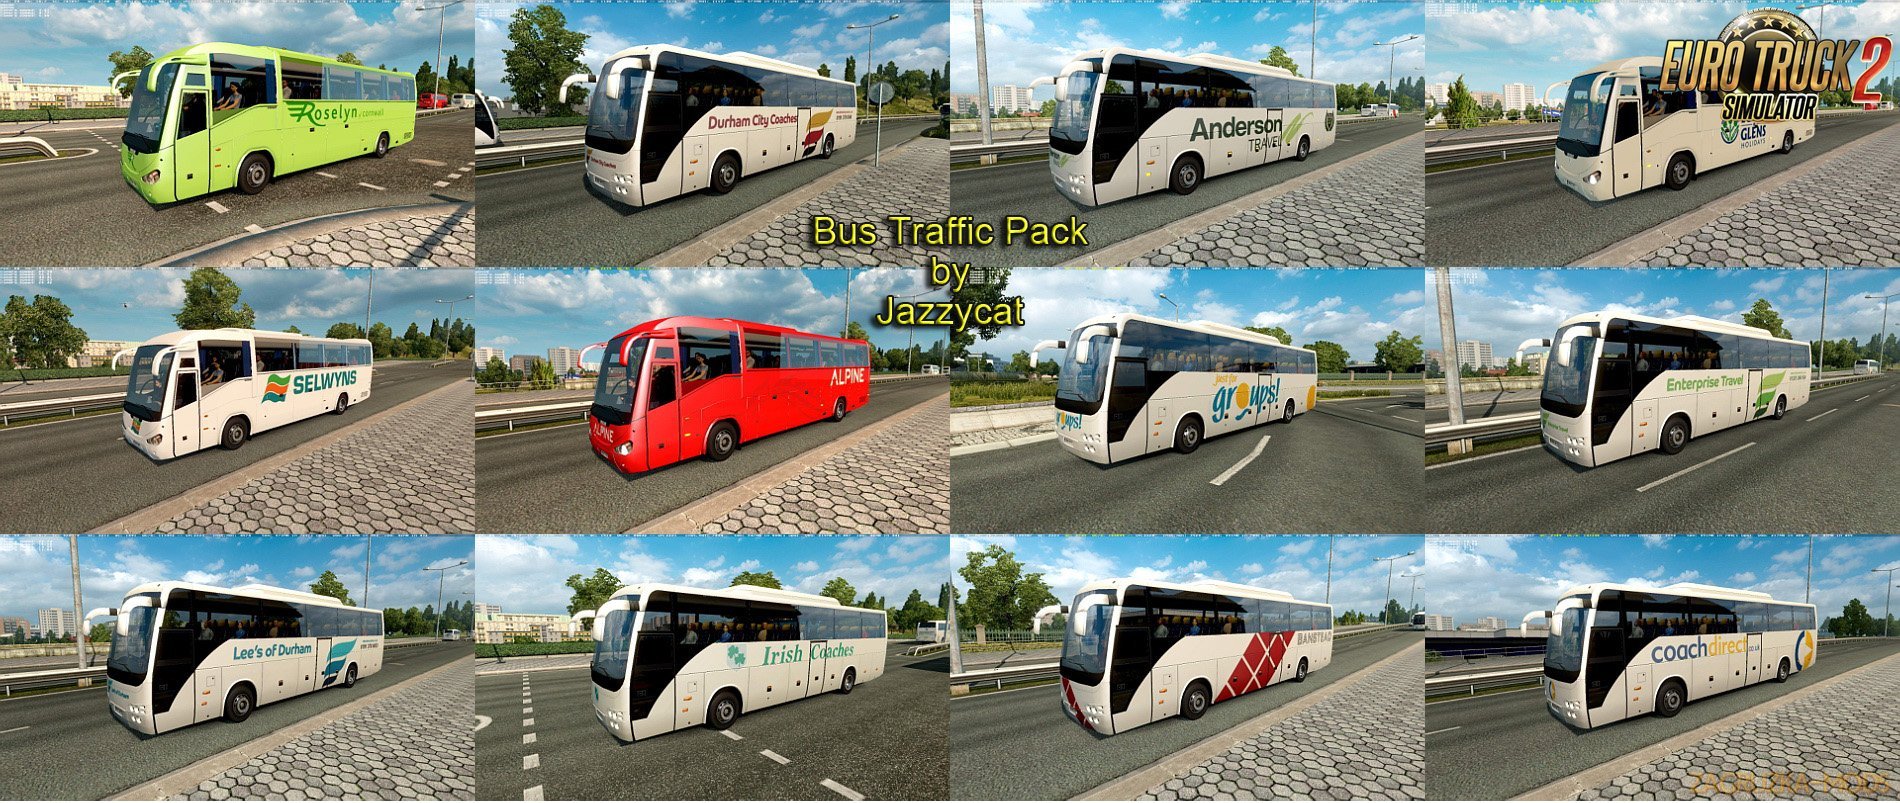 Bus Traffic Pack v3.0 by Jazzycat